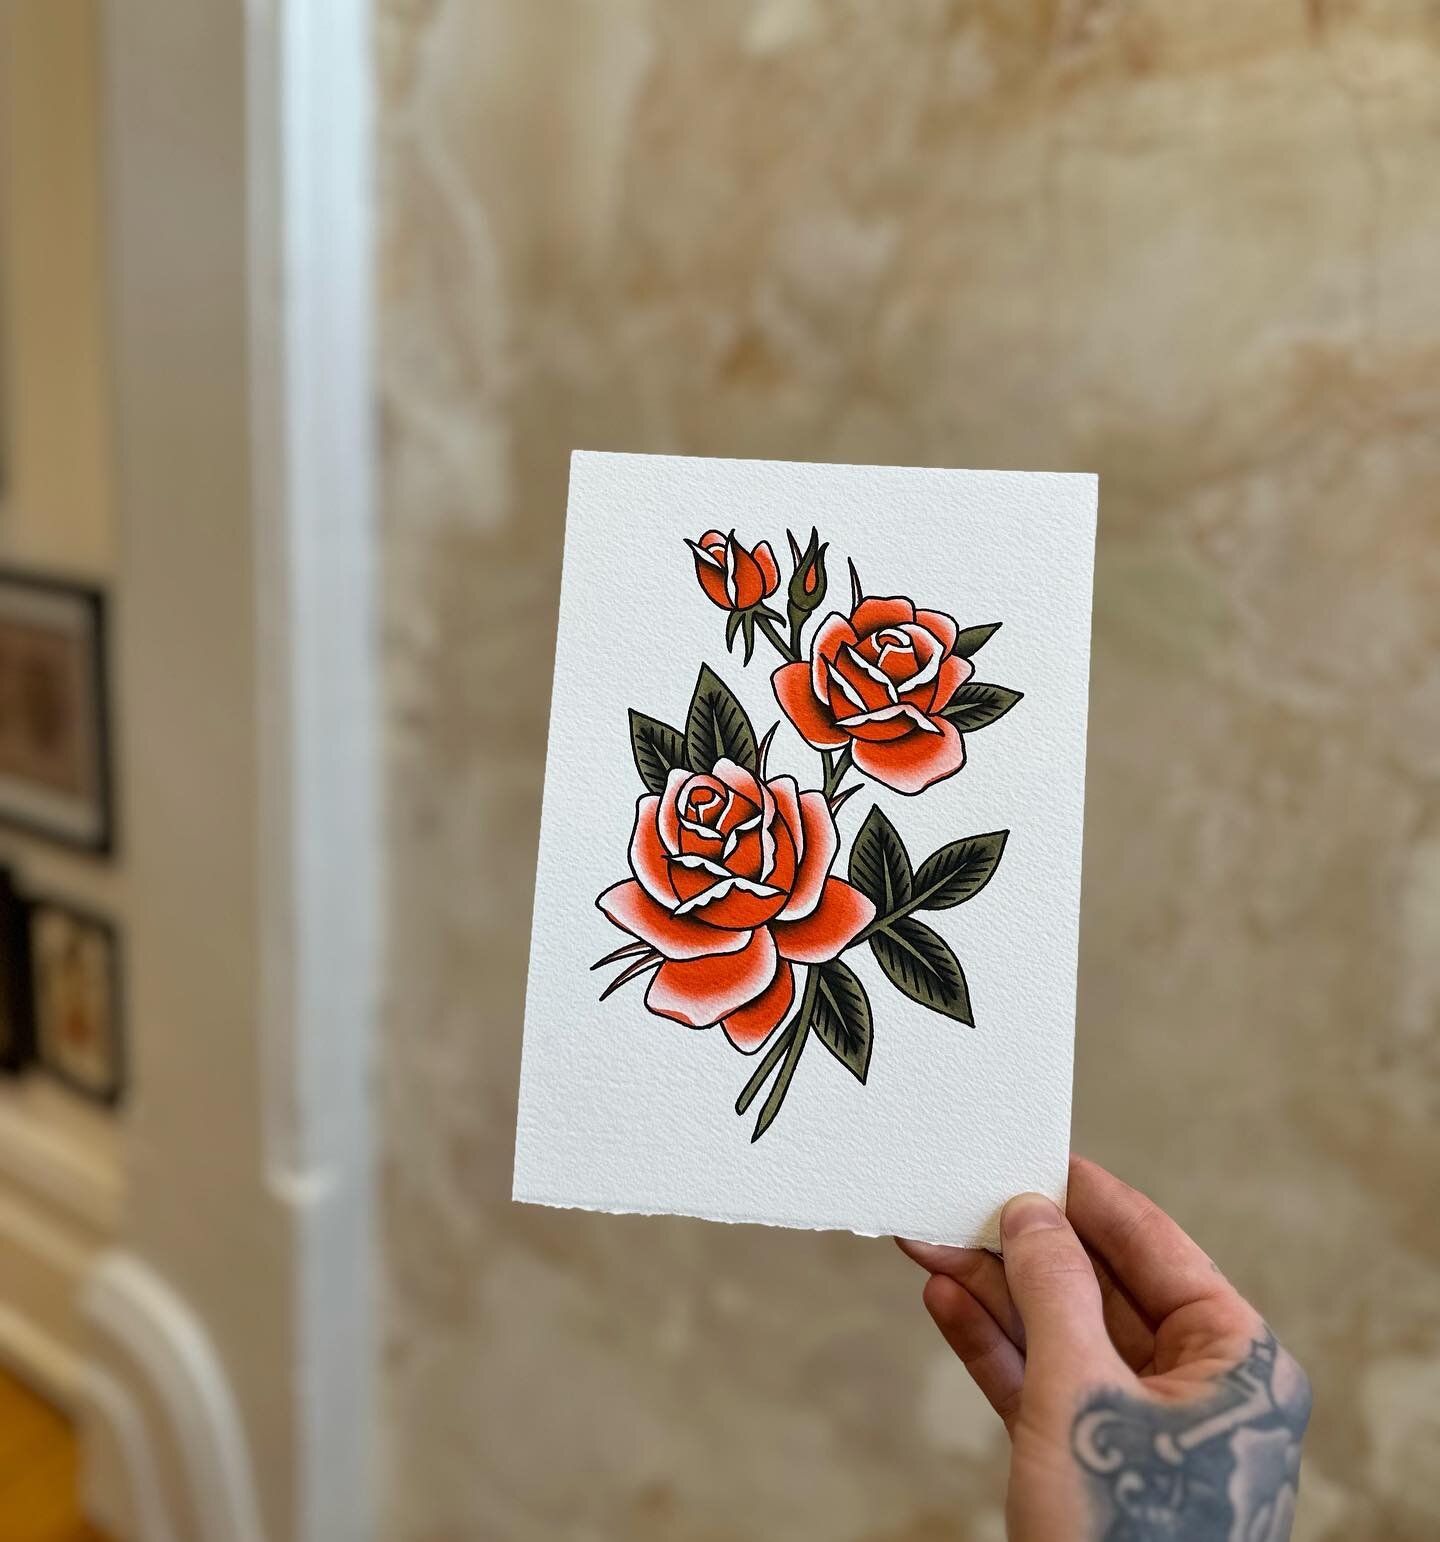 🍂This little A5 painting is available to purchase on my web-store! I'd also be super stoked to tattoo this one 🌹

⠀⠀⠀⠀⠀⠀⠀
✉️ For all bookings &amp; enquiries please email justintattoo28@gmail.com || Form link in bio🌹